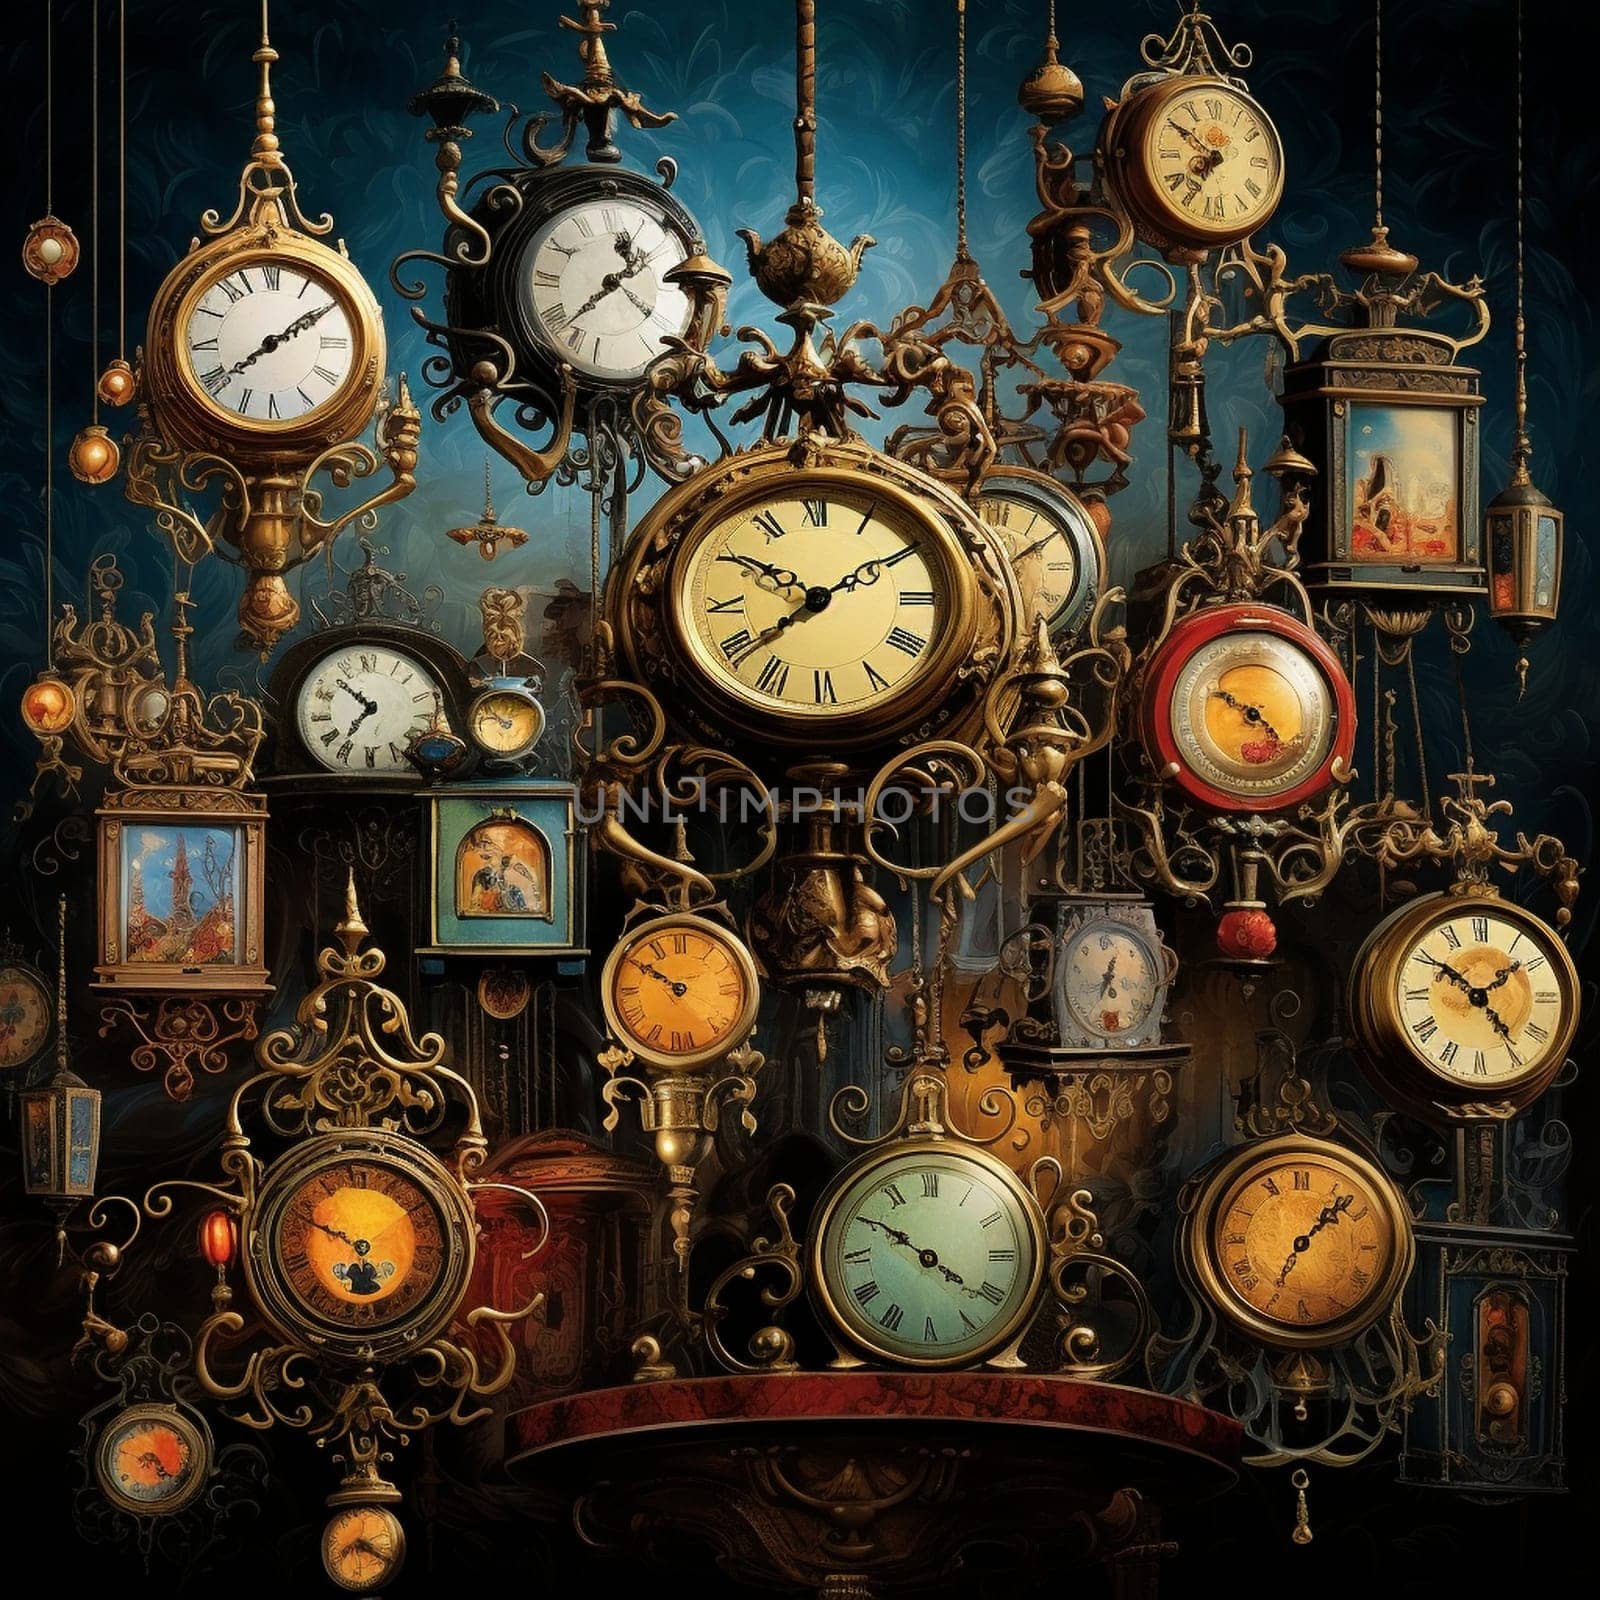 Antique Symphony: Melodies of Time in Vintage Clocks by Sahin